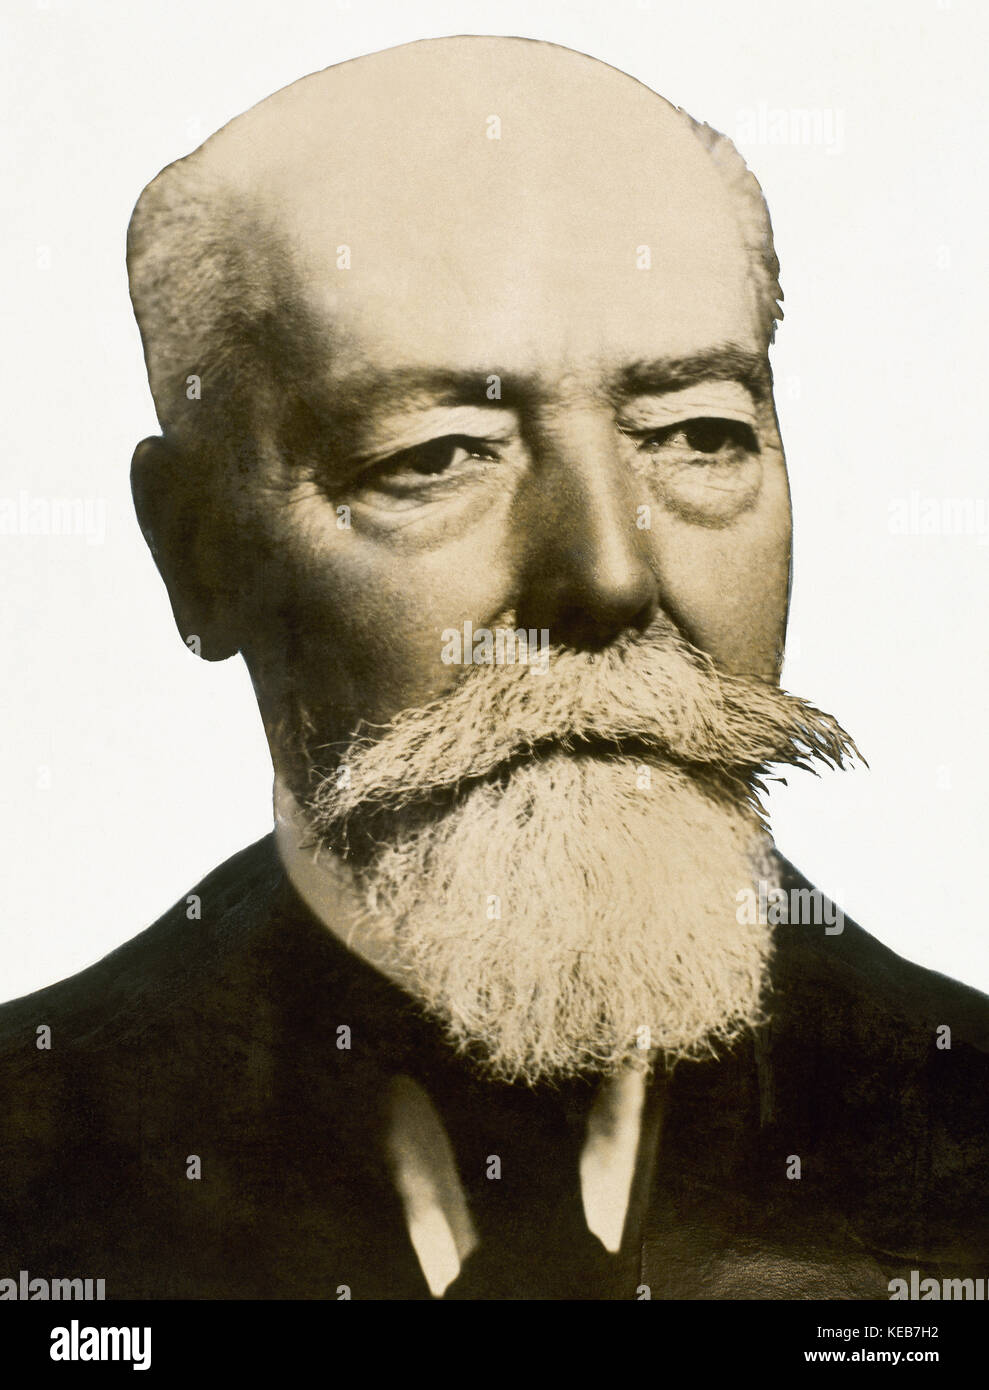 Paul Doumer (1857-1932). French politician. President of France from 1931 until his assassination. Portrait. Photography. Stock Photo